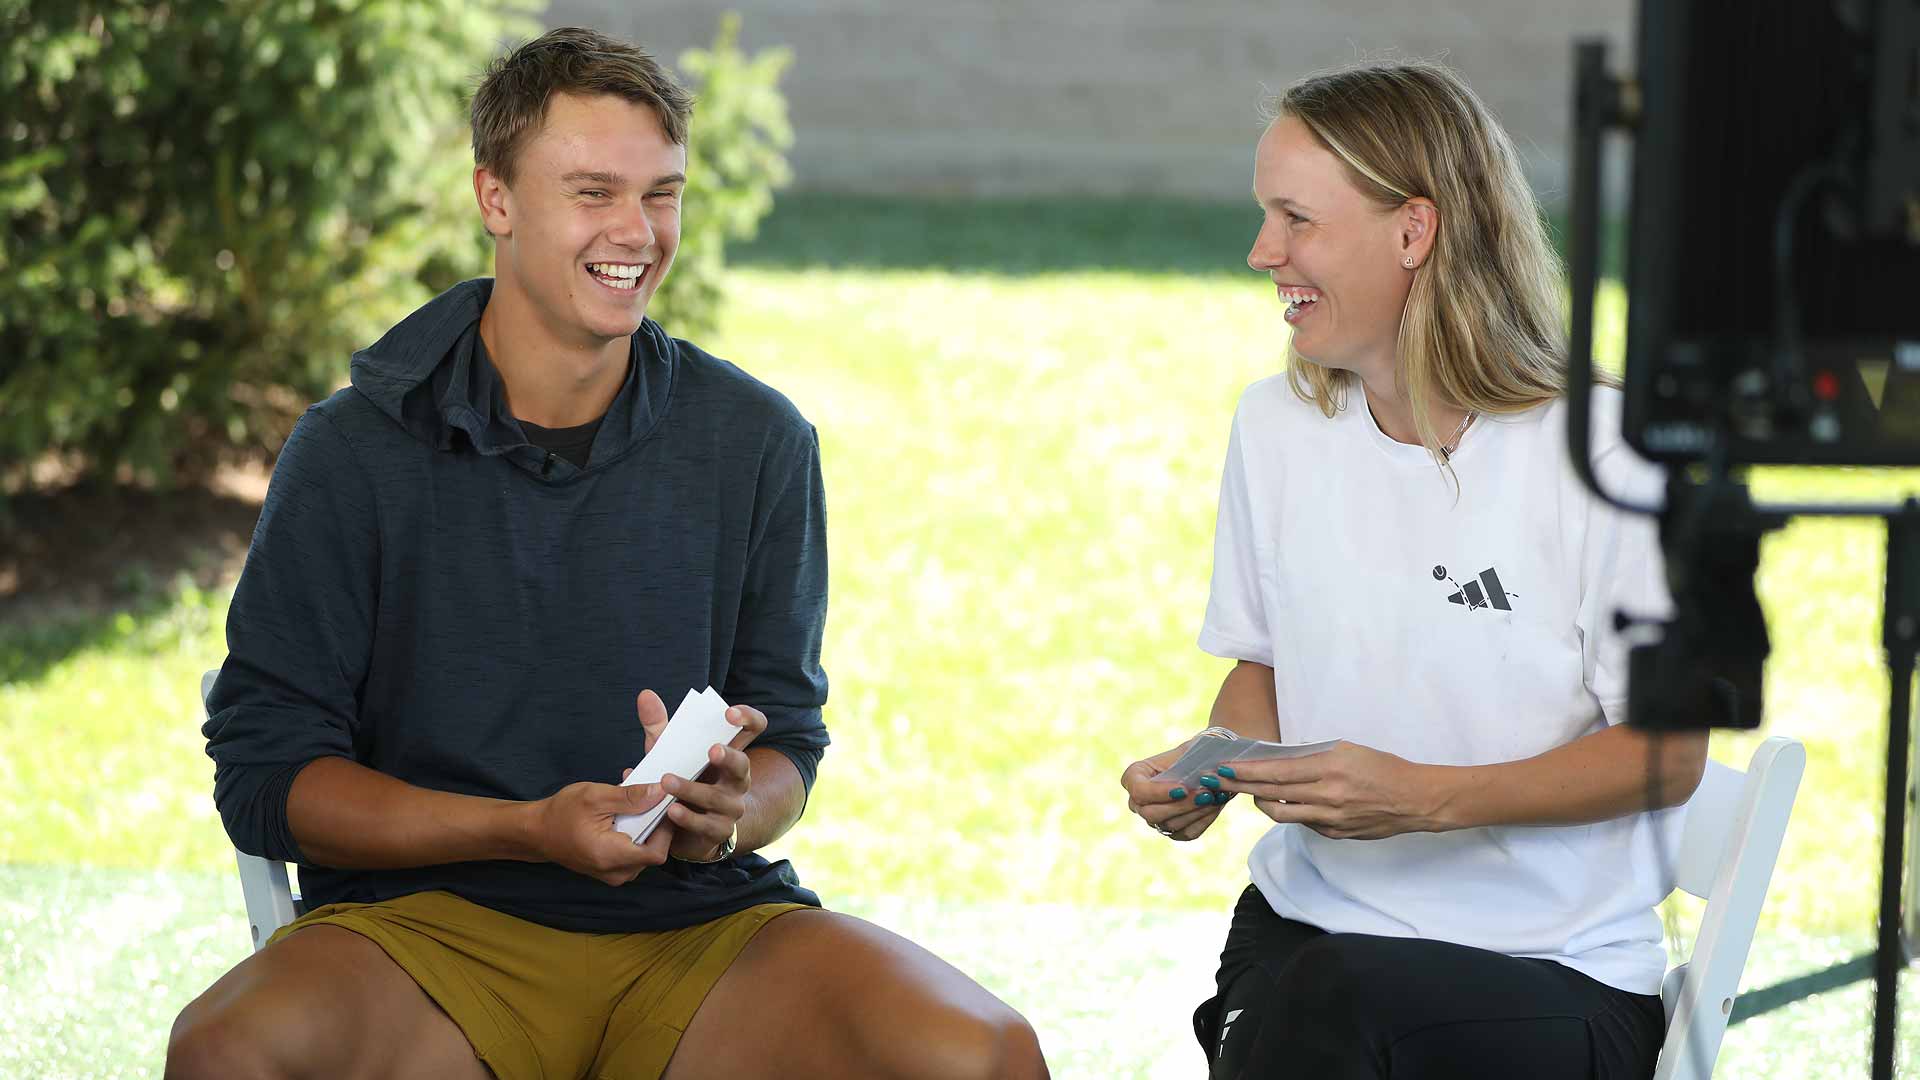 <a href='https://www.atptour.com/en/players/holger-rune/r0dg/overview'>Holger Rune</a> and Caroline Wozniacki spend time together in Cincinnati before the start of the Western & Southern Open.